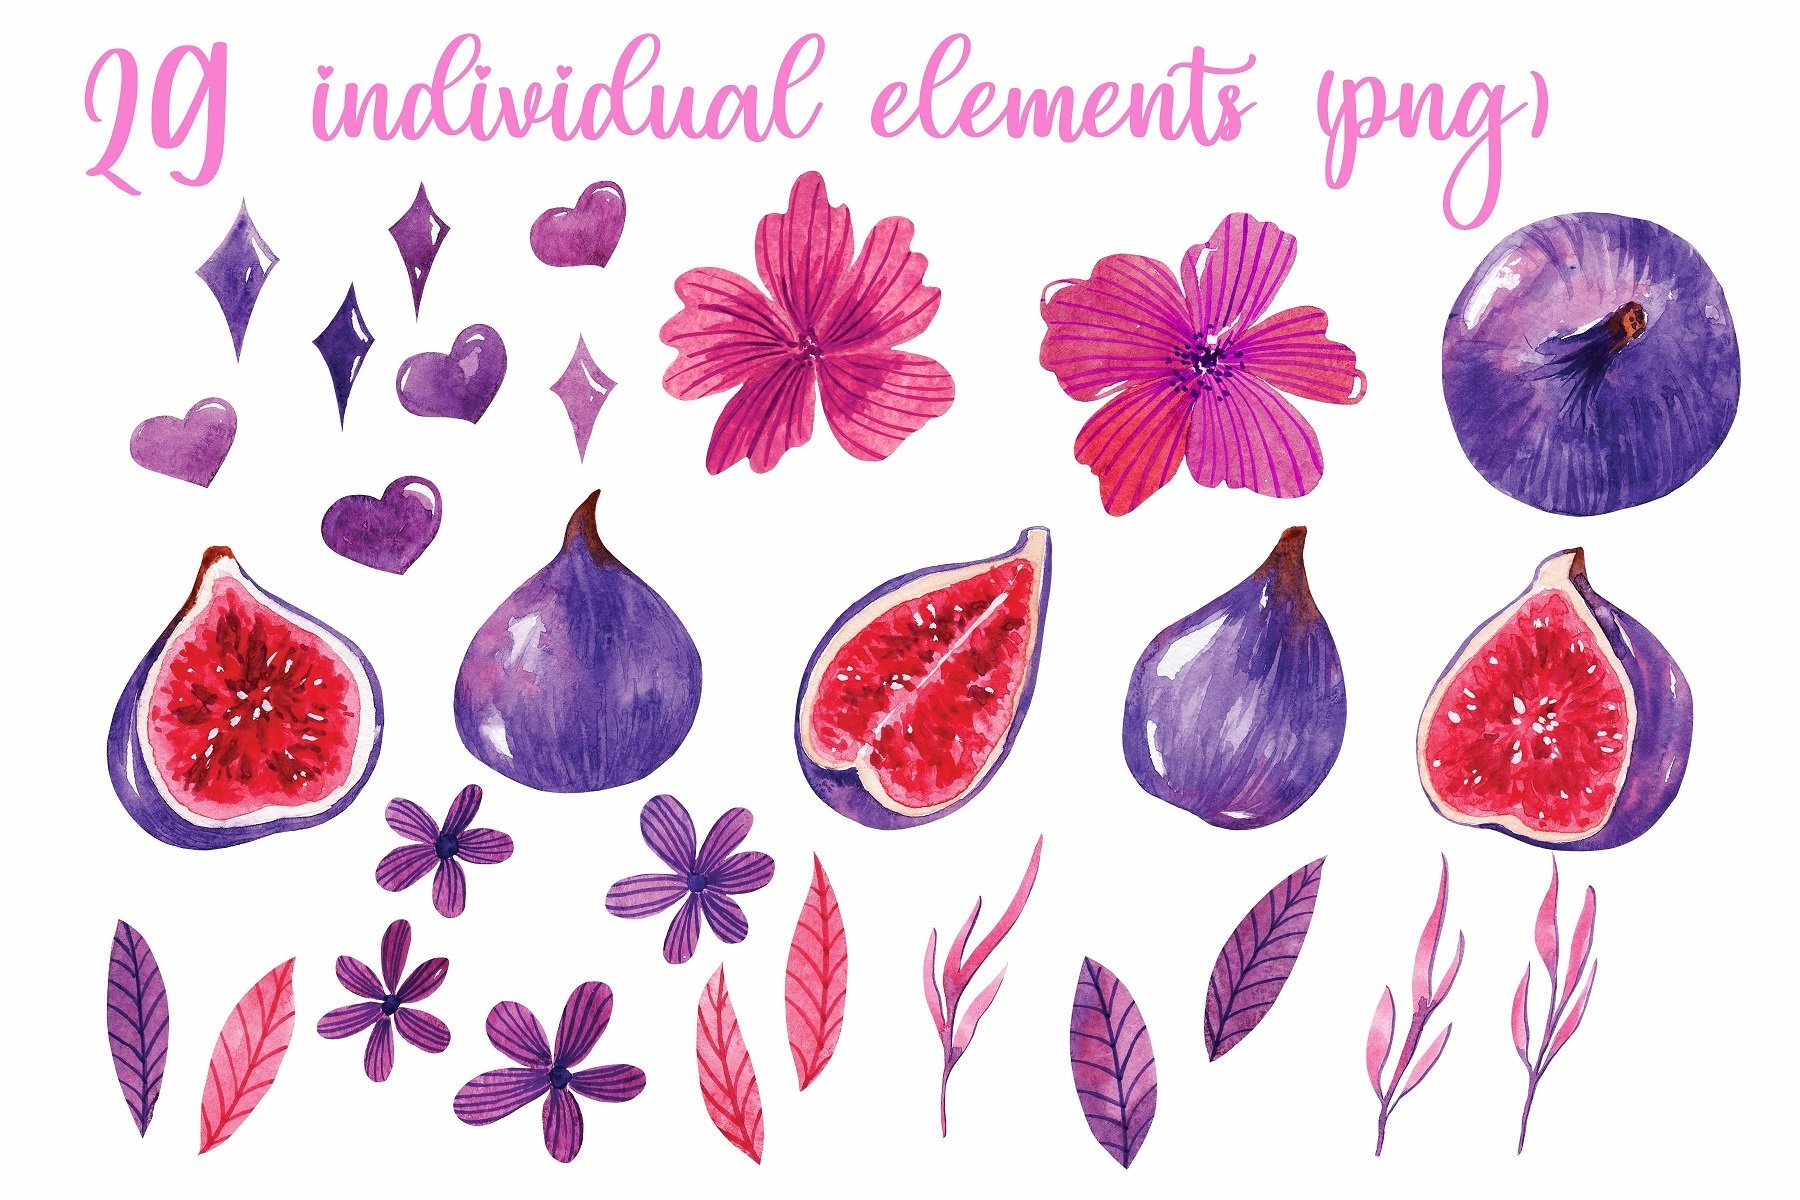 Watercolor painting of different types of fruit.